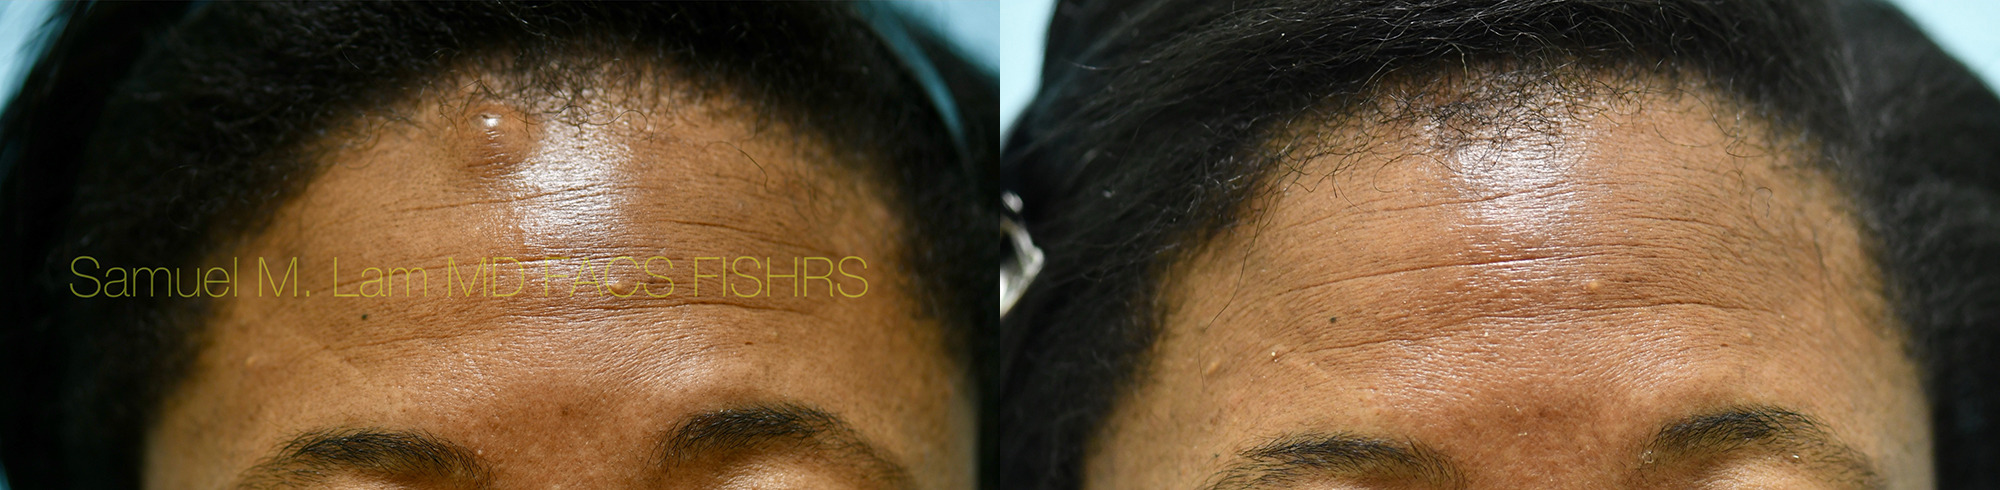 Mole Removal Before and After Photo by Dr. Lam in Plano, TX